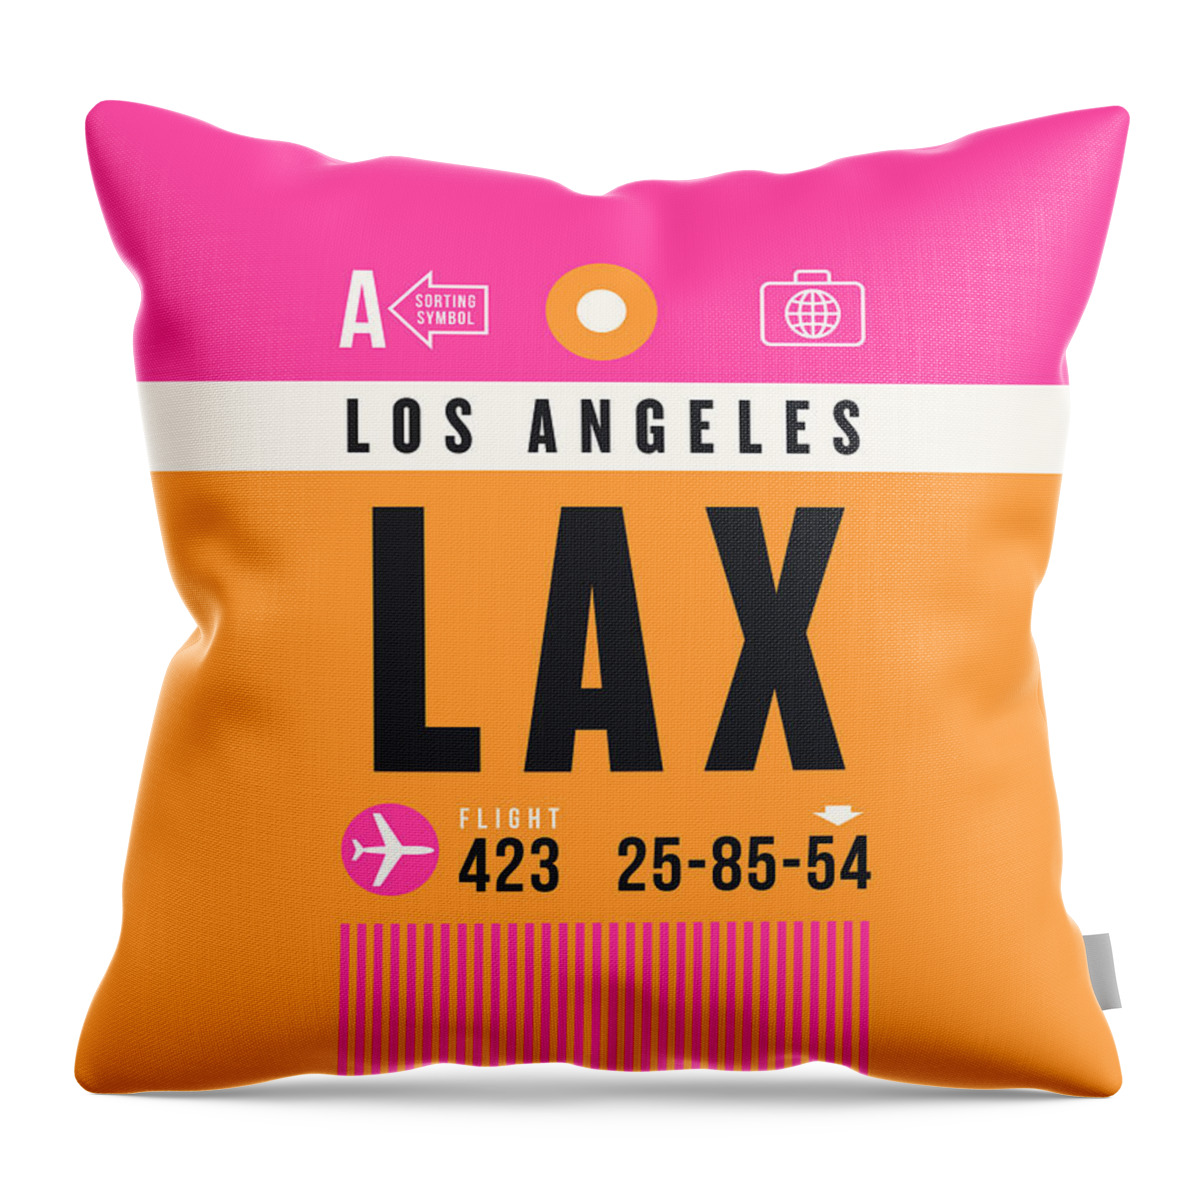 Airline Throw Pillow featuring the digital art Luggage Tag A - LAX Los Angeles USA by Organic Synthesis